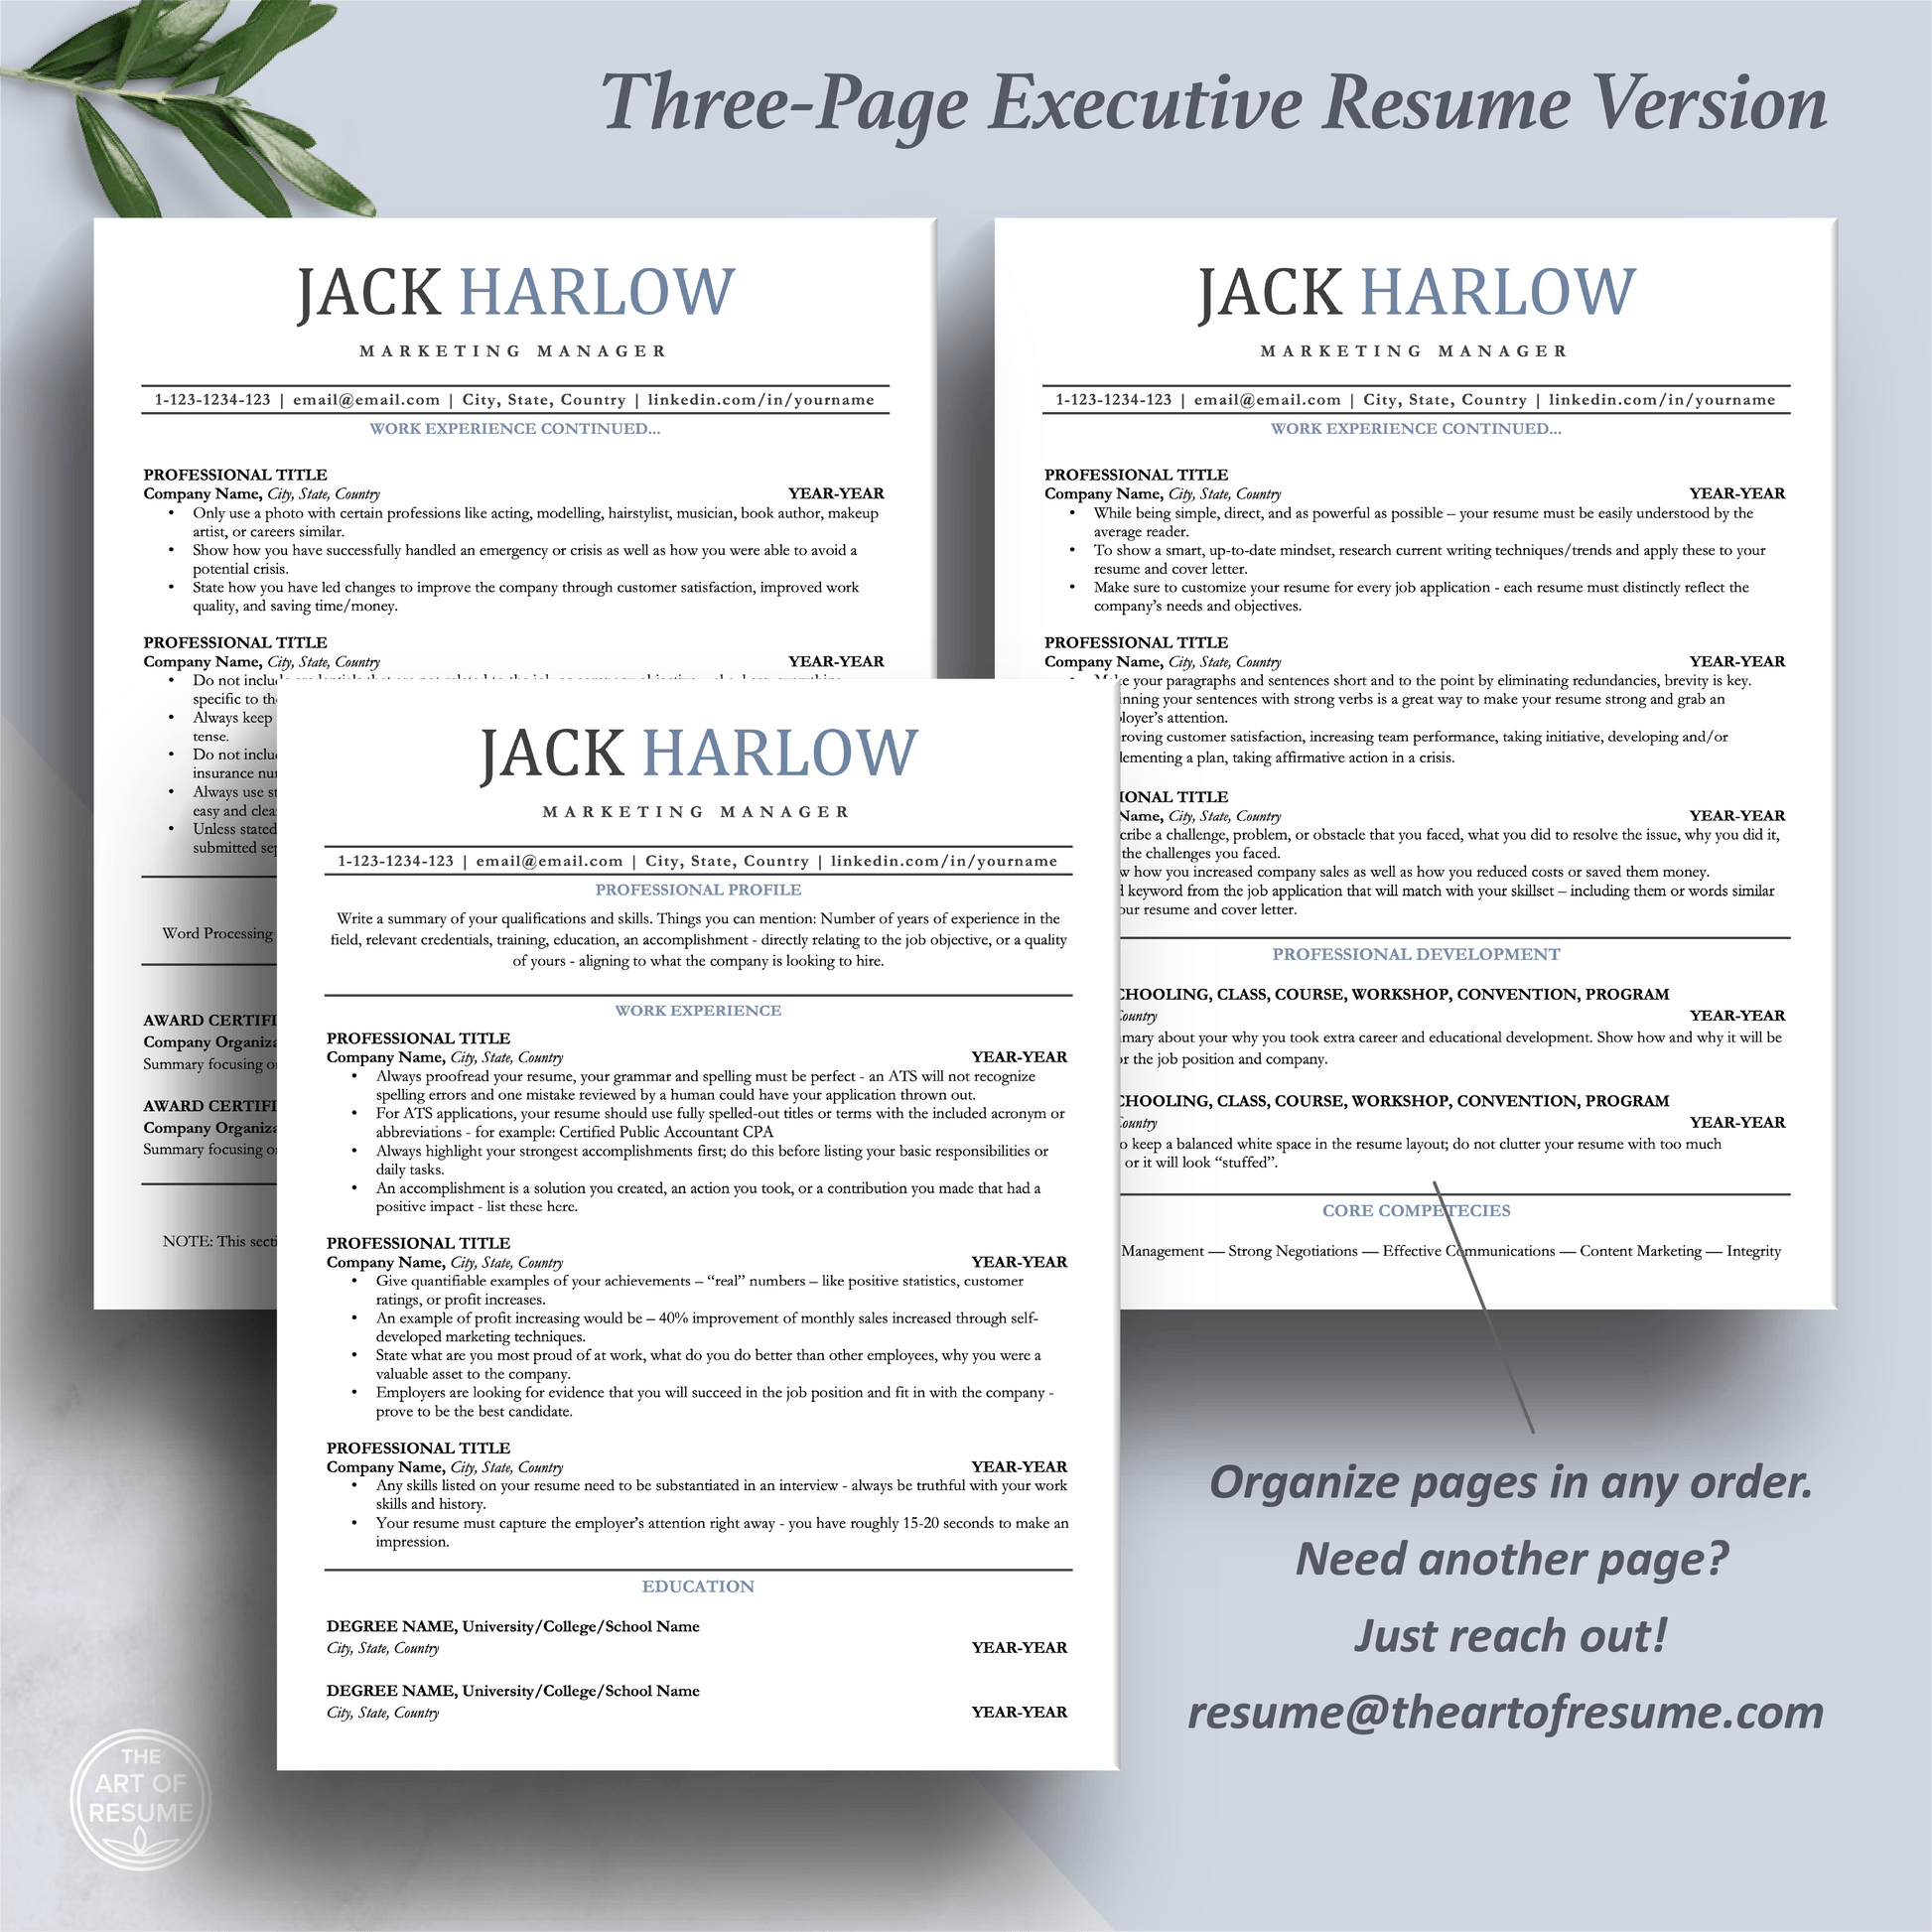 Professional ATS Resume CV Template | Applicant Tracking System Friendly | One-Column CV - The Art of Resume